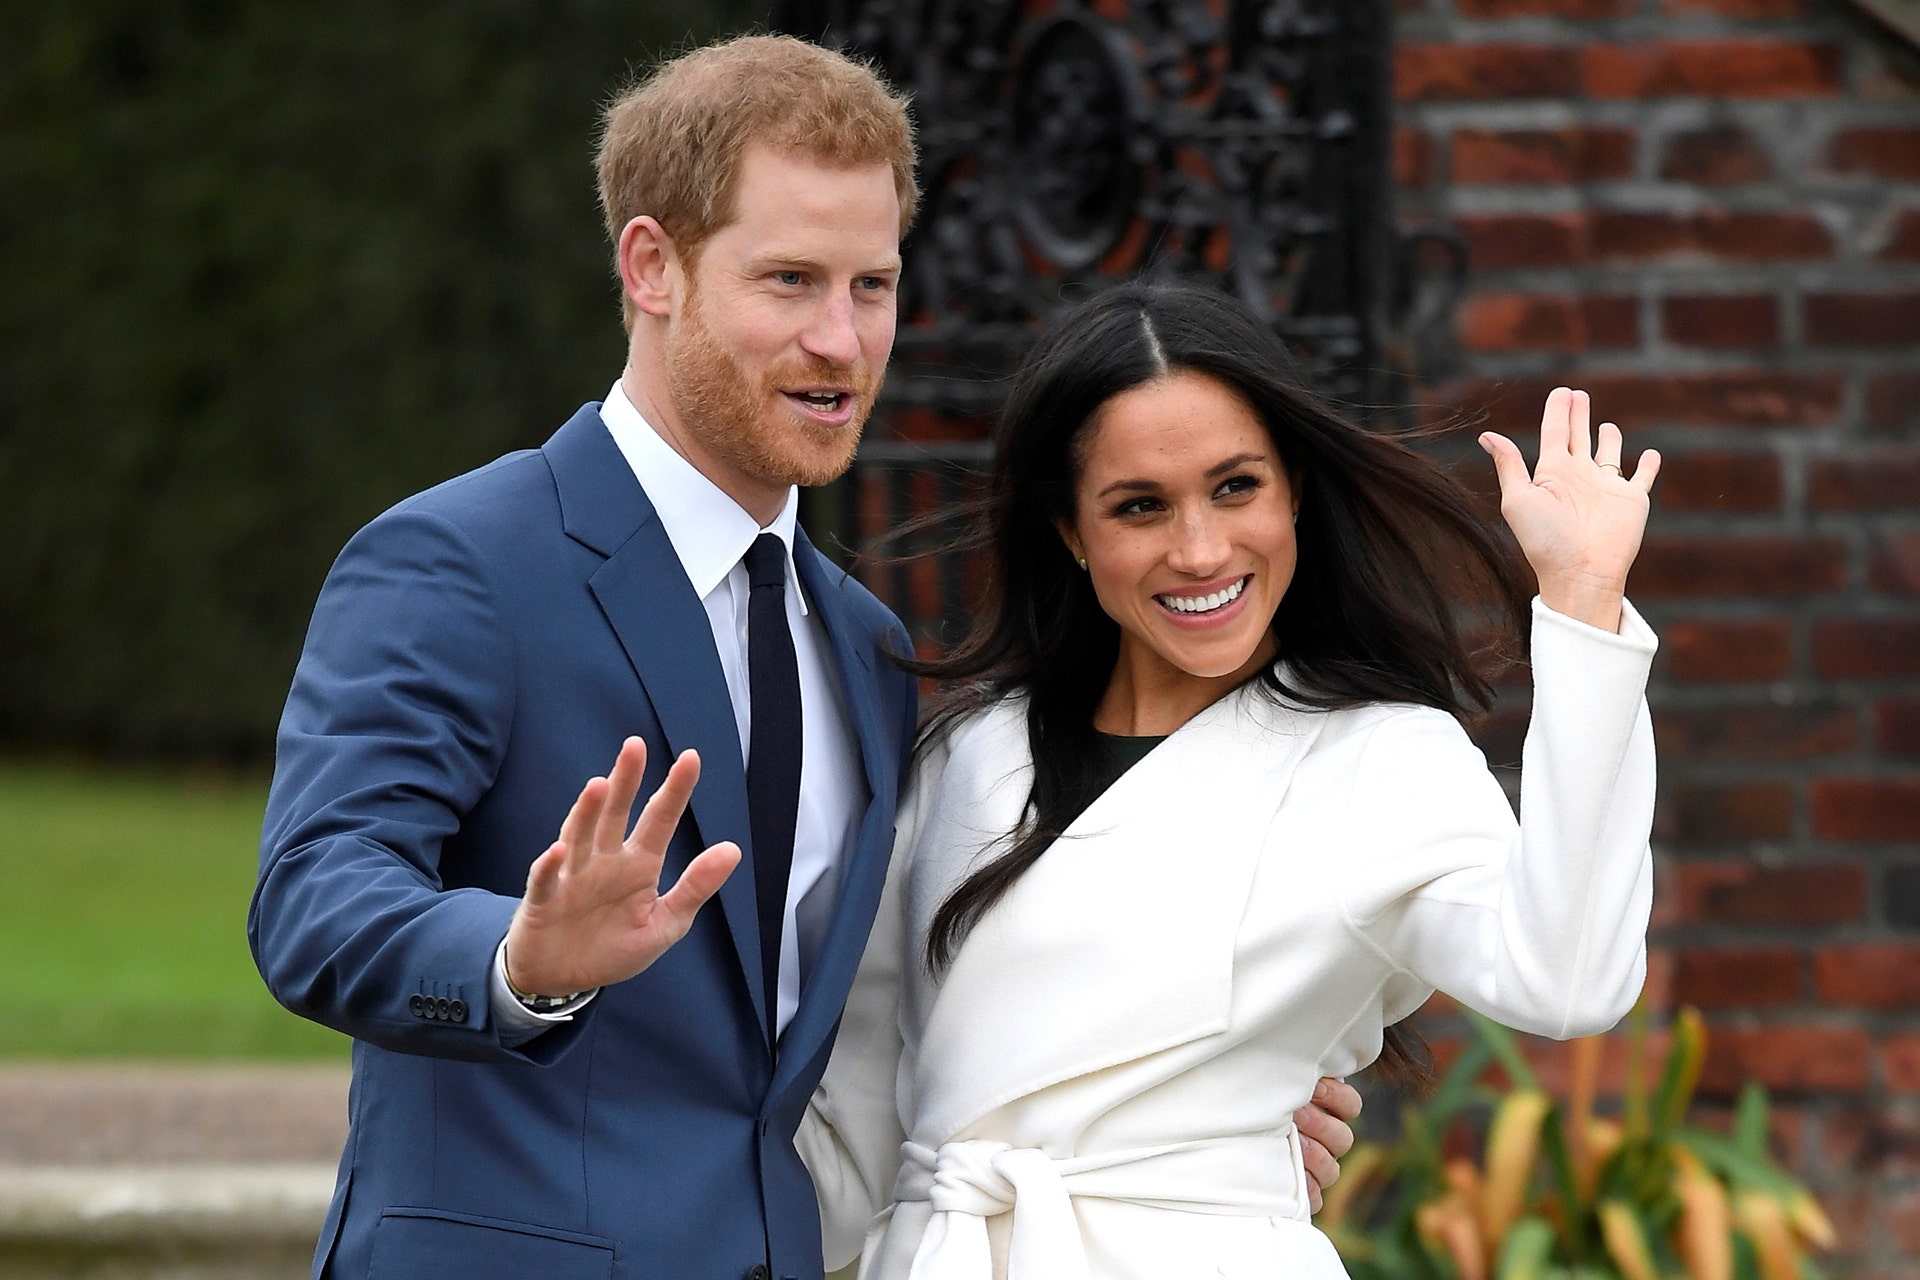 Meghan Markle, Prince Harry did not speak to palace holders before agreeing to the Oprah interview: source